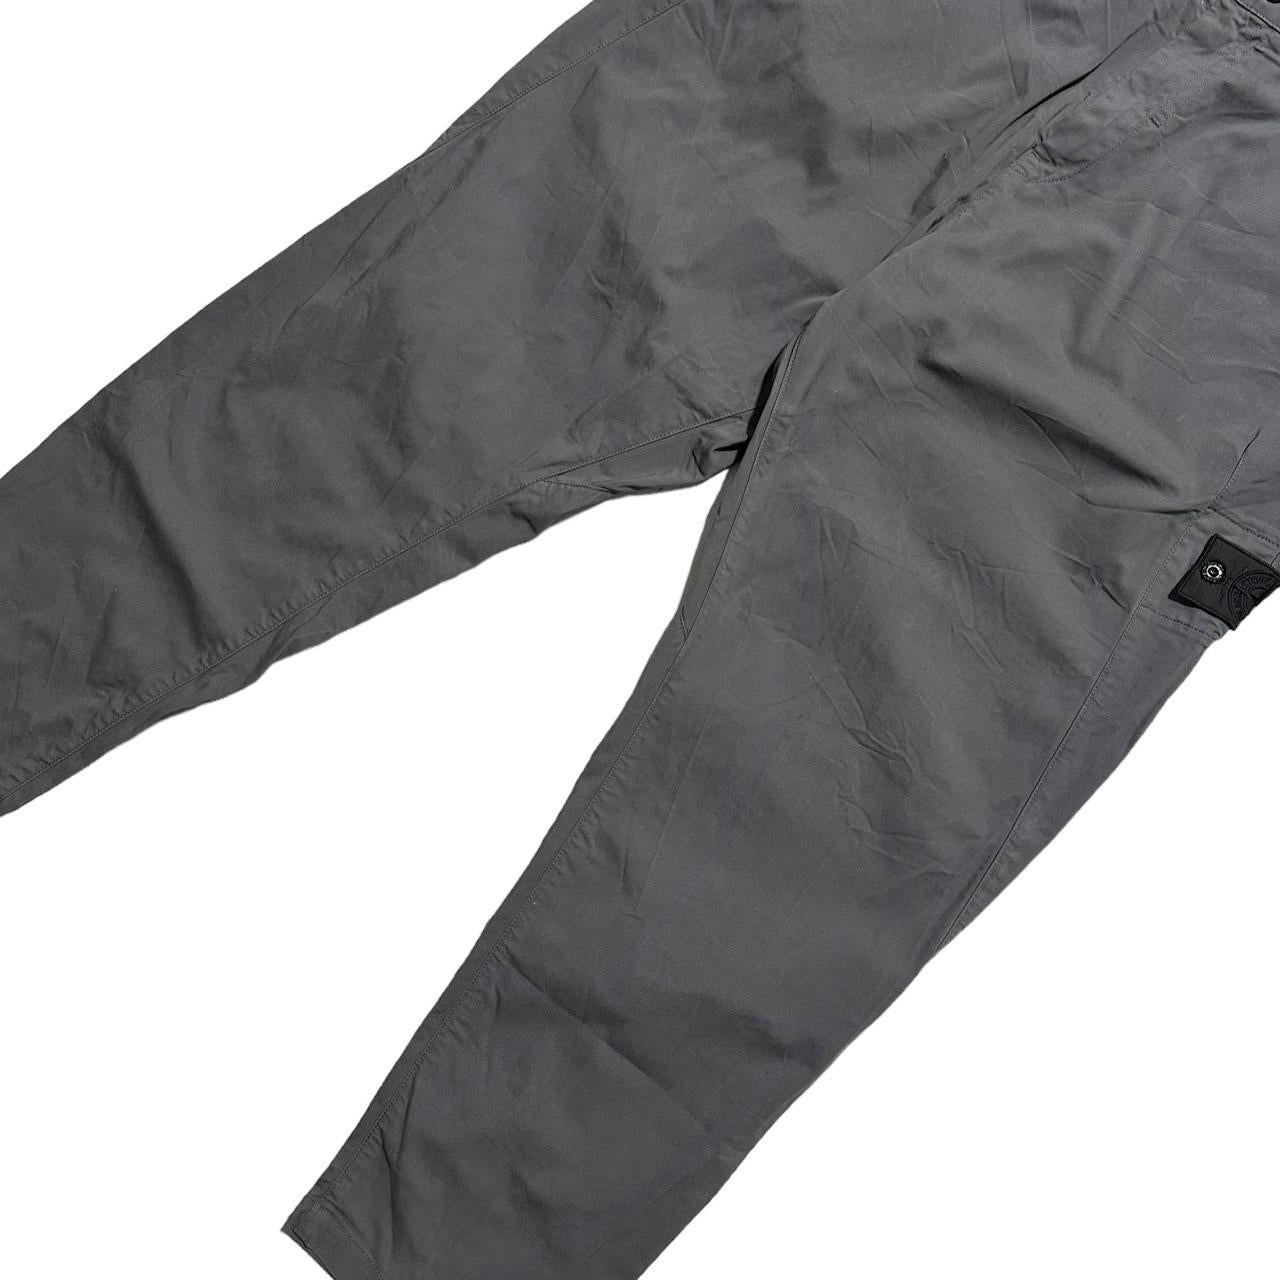 Stone Island Shadow Project Chino Trousers